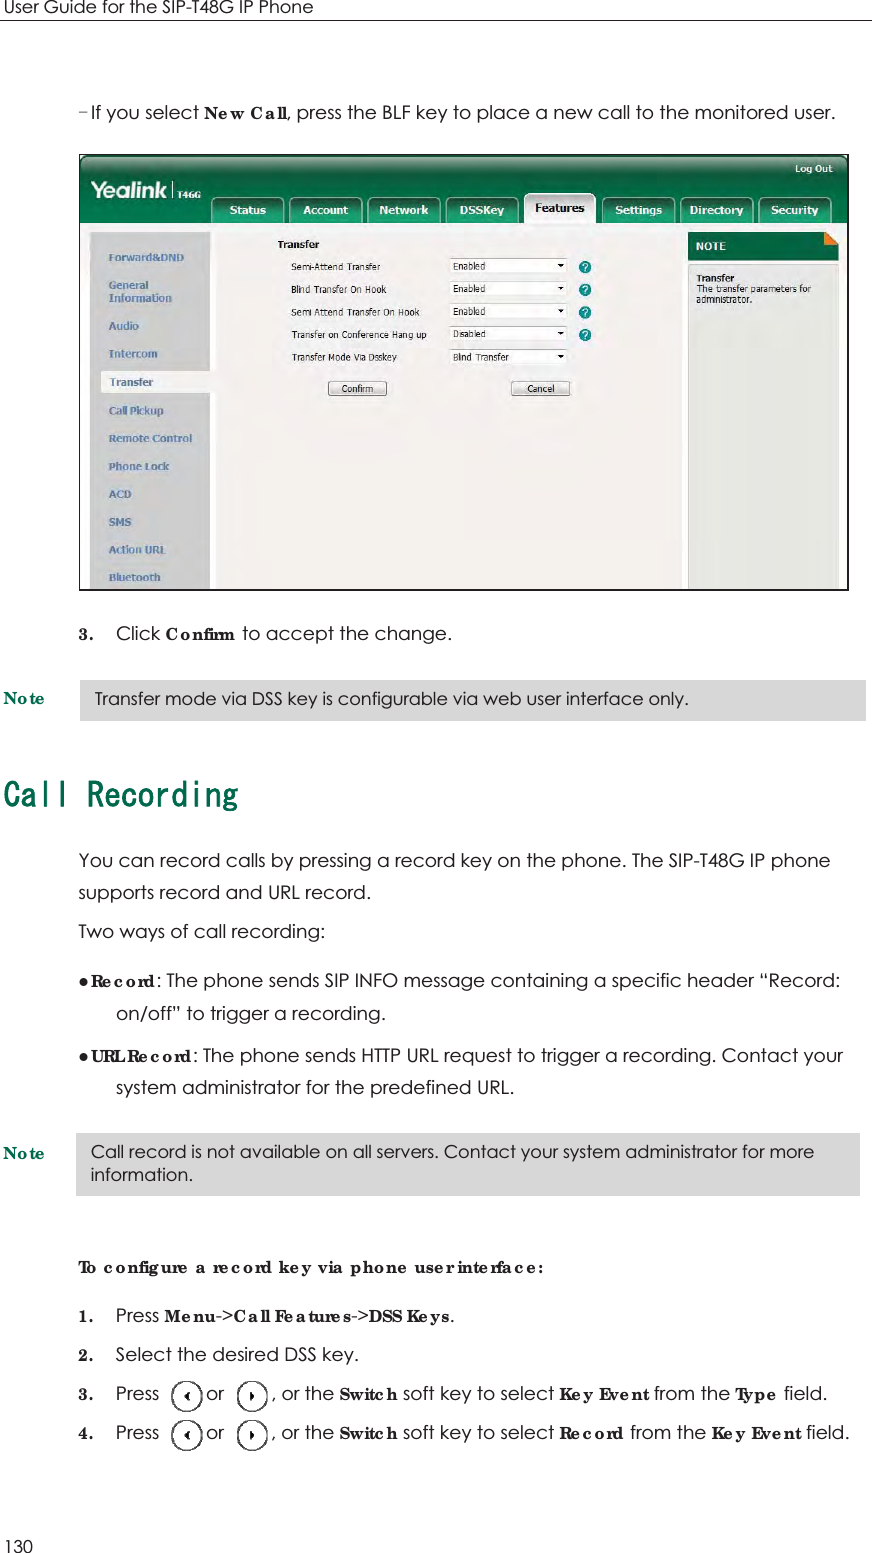 User Guide for the SIP-T48G IP Phone 130  If you select New Call, press the BLF key to place a new call to the monitored user.  3. Click Confirm to accept the change. Note%CNN4GEQTFKPIYou can record calls by pressing a record key on the phone. The SIP-T48G IP phone supports record and URL record. Two ways of call recording: zRecord: The phone sends SIP INFO message containing a specific header “Record: on/off” to trigger a recording. zURL Record: The phone sends HTTP URL request to trigger a recording. Contact your system administrator for the predefined URL. Note To configure a record key via phone user interface: 1. Press Menu-&gt;Call Features-&gt;DSS Keys. 2. Select the desired DSS key. 3. Press     or     , or the Switch soft key to select Key Event from the Type field. 4. Press     or     , or the Switch soft key to select Record from the Key Event field. Call record is not available on all servers. Contact your system administrator for more information. Transfer mode via DSS key is configurable via web user interface only. 